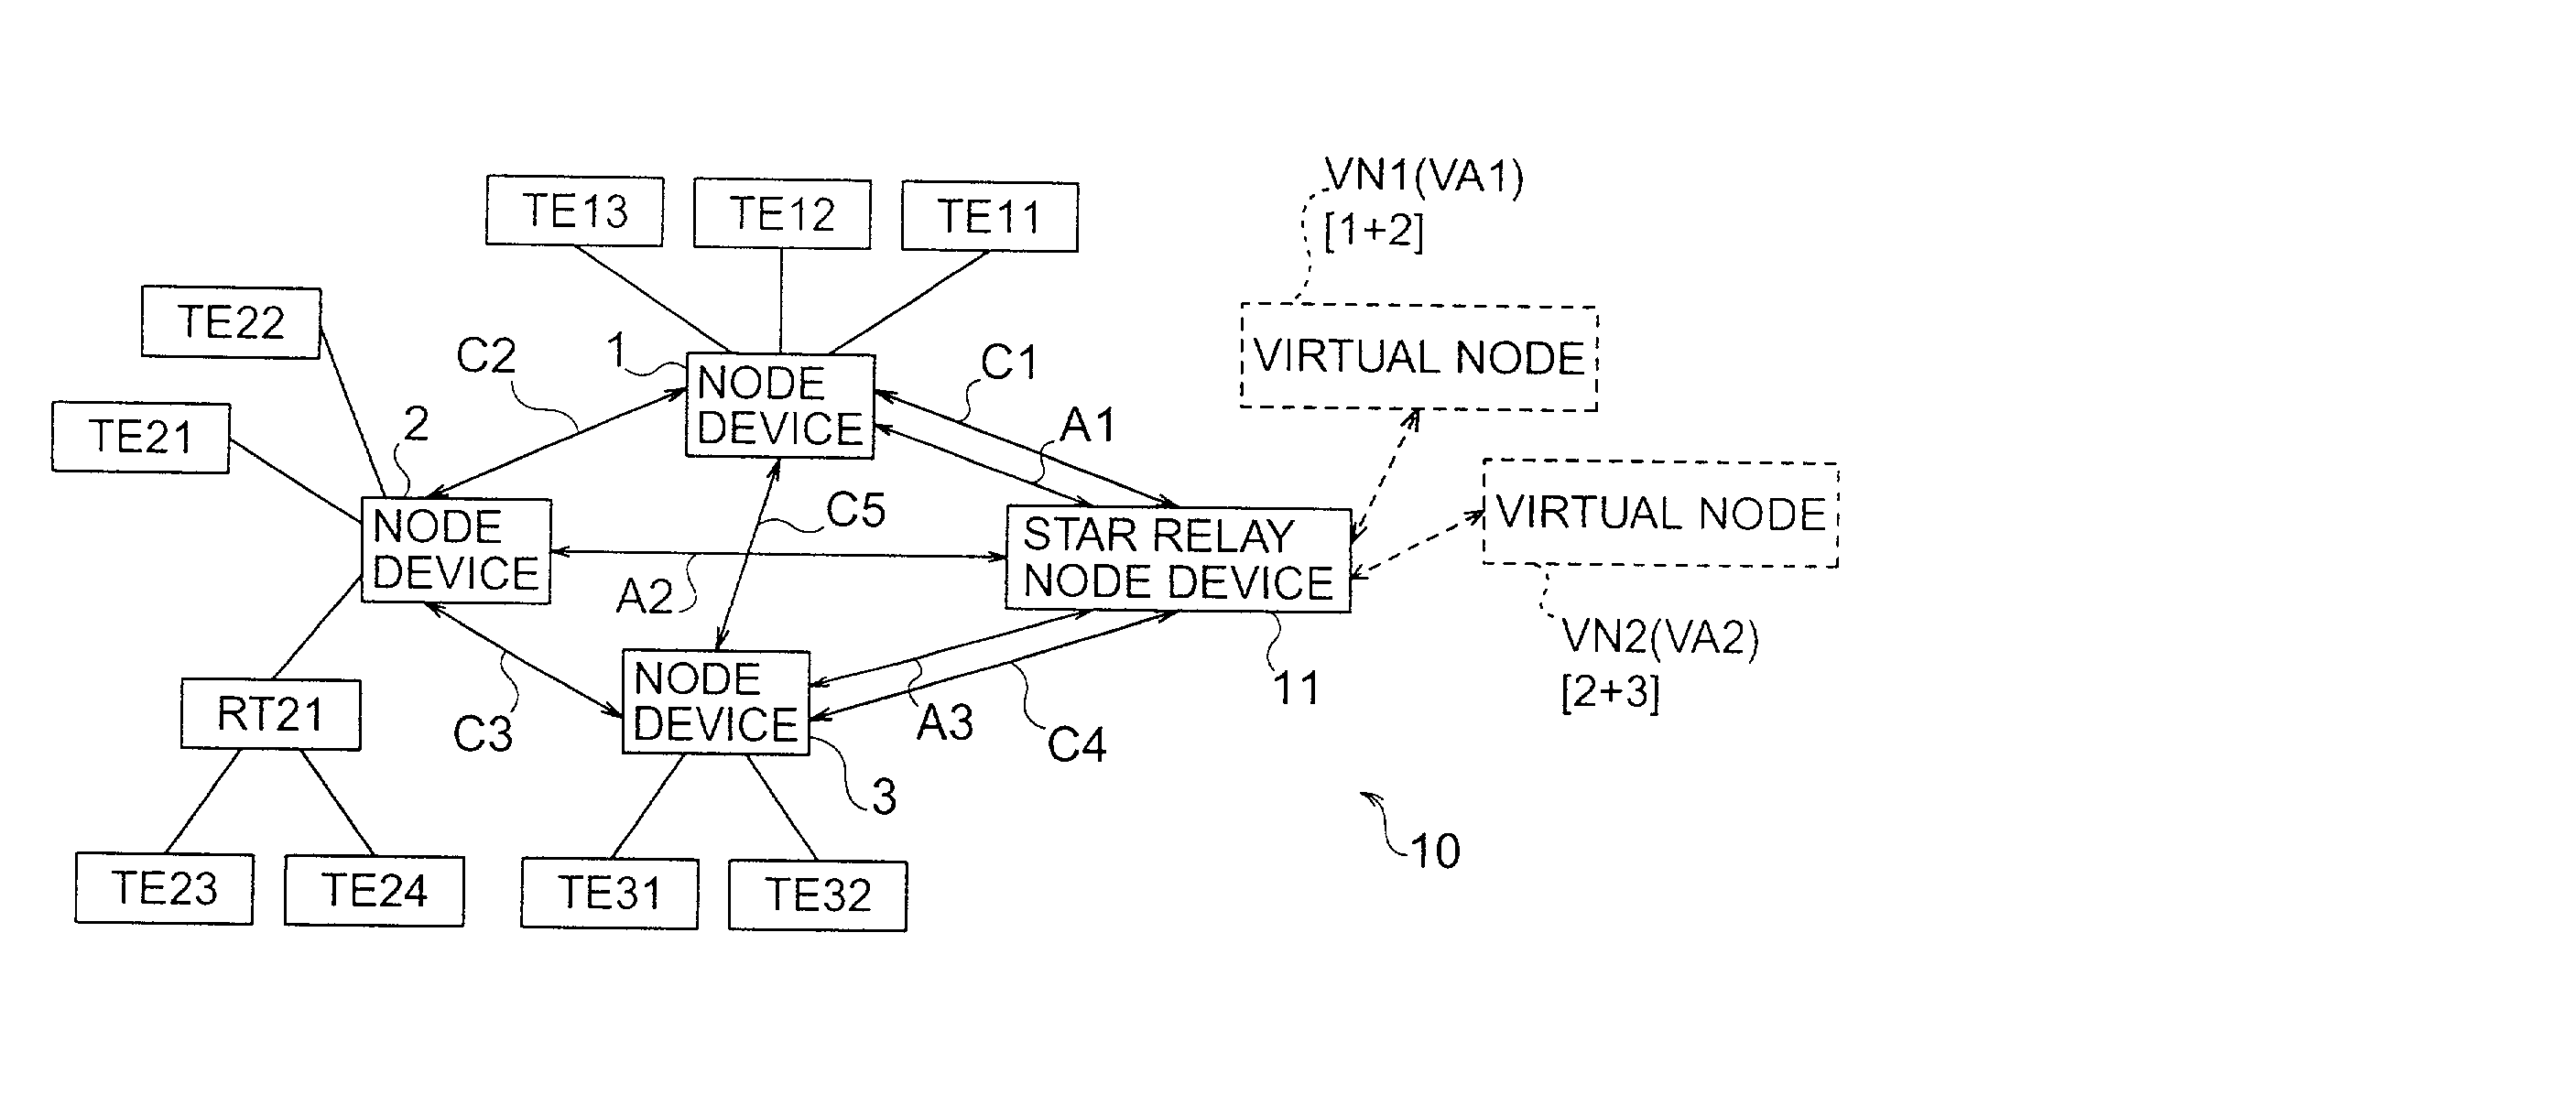 Network communication system with relay node for broadcasts and multicasts